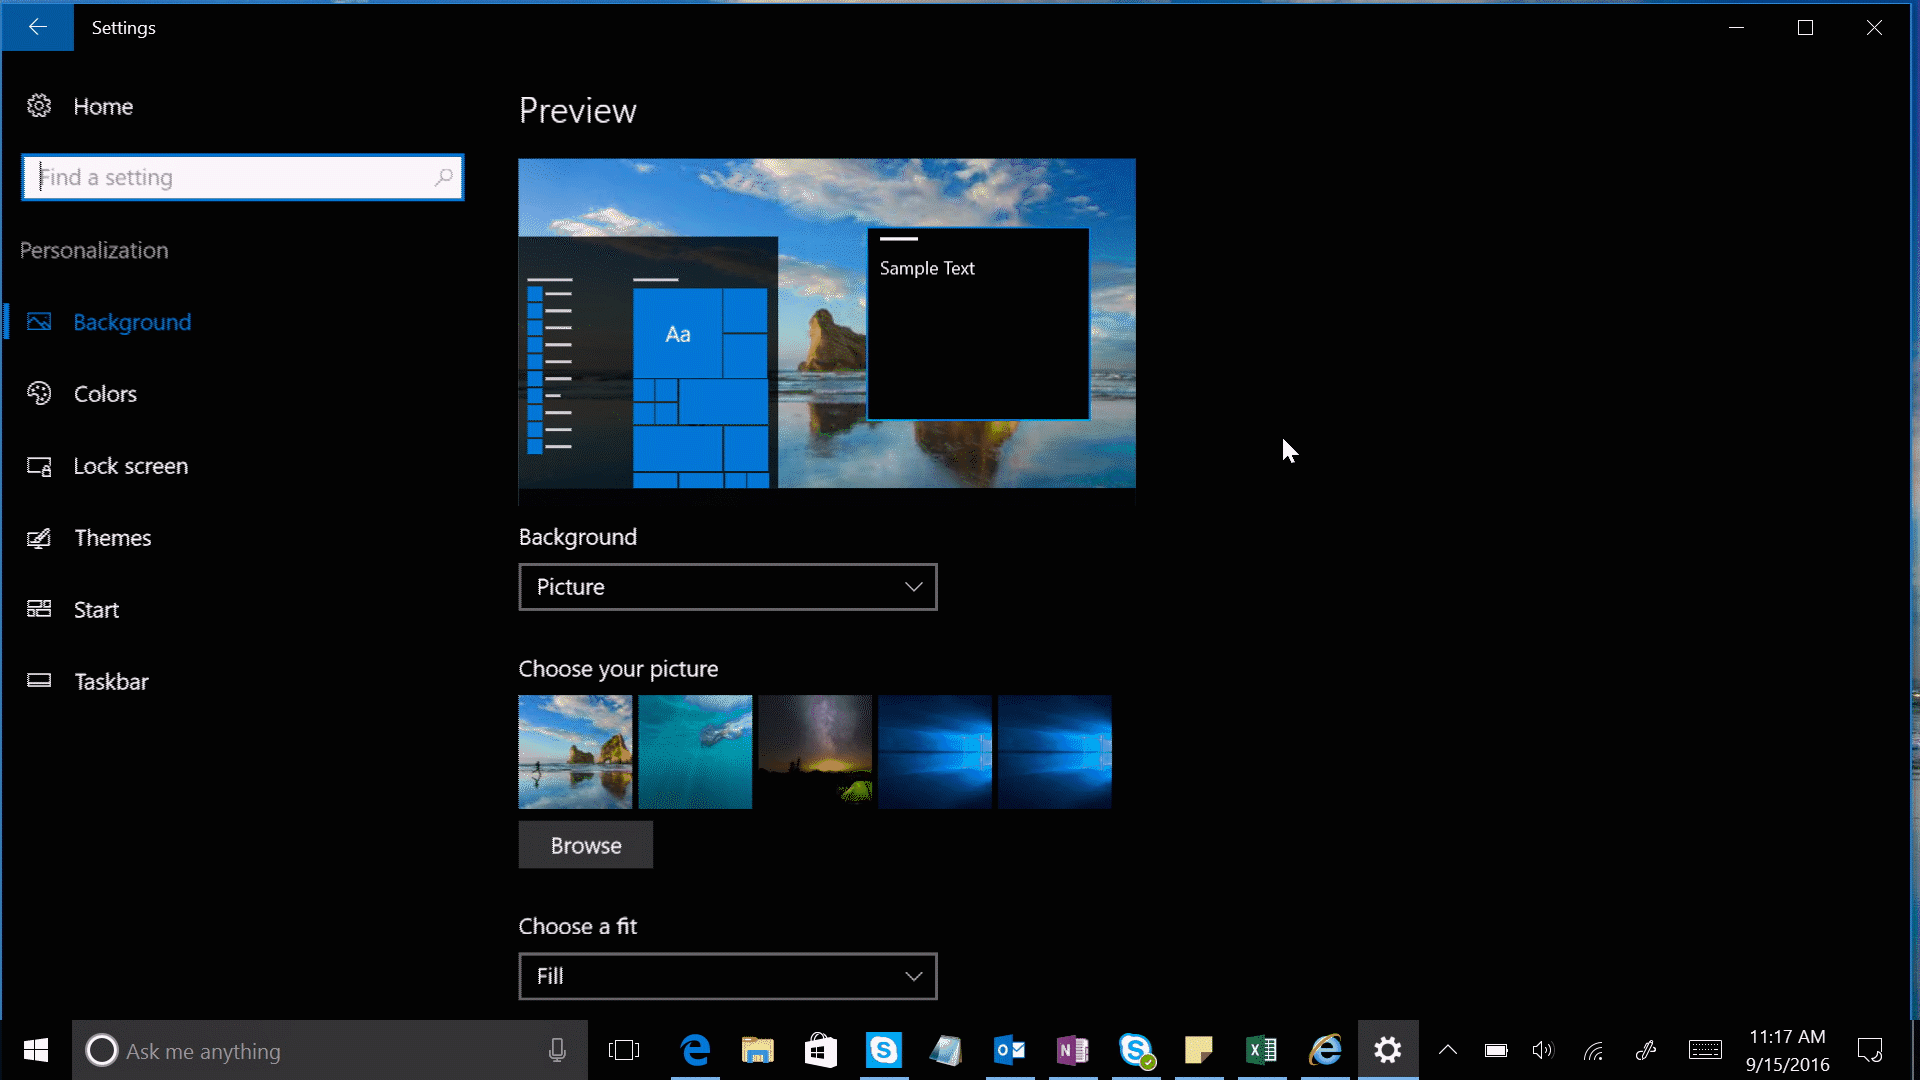 Windows 10 Tip: How to enable Windows Spotlight images on your lock screen  | Windows Experience Blog